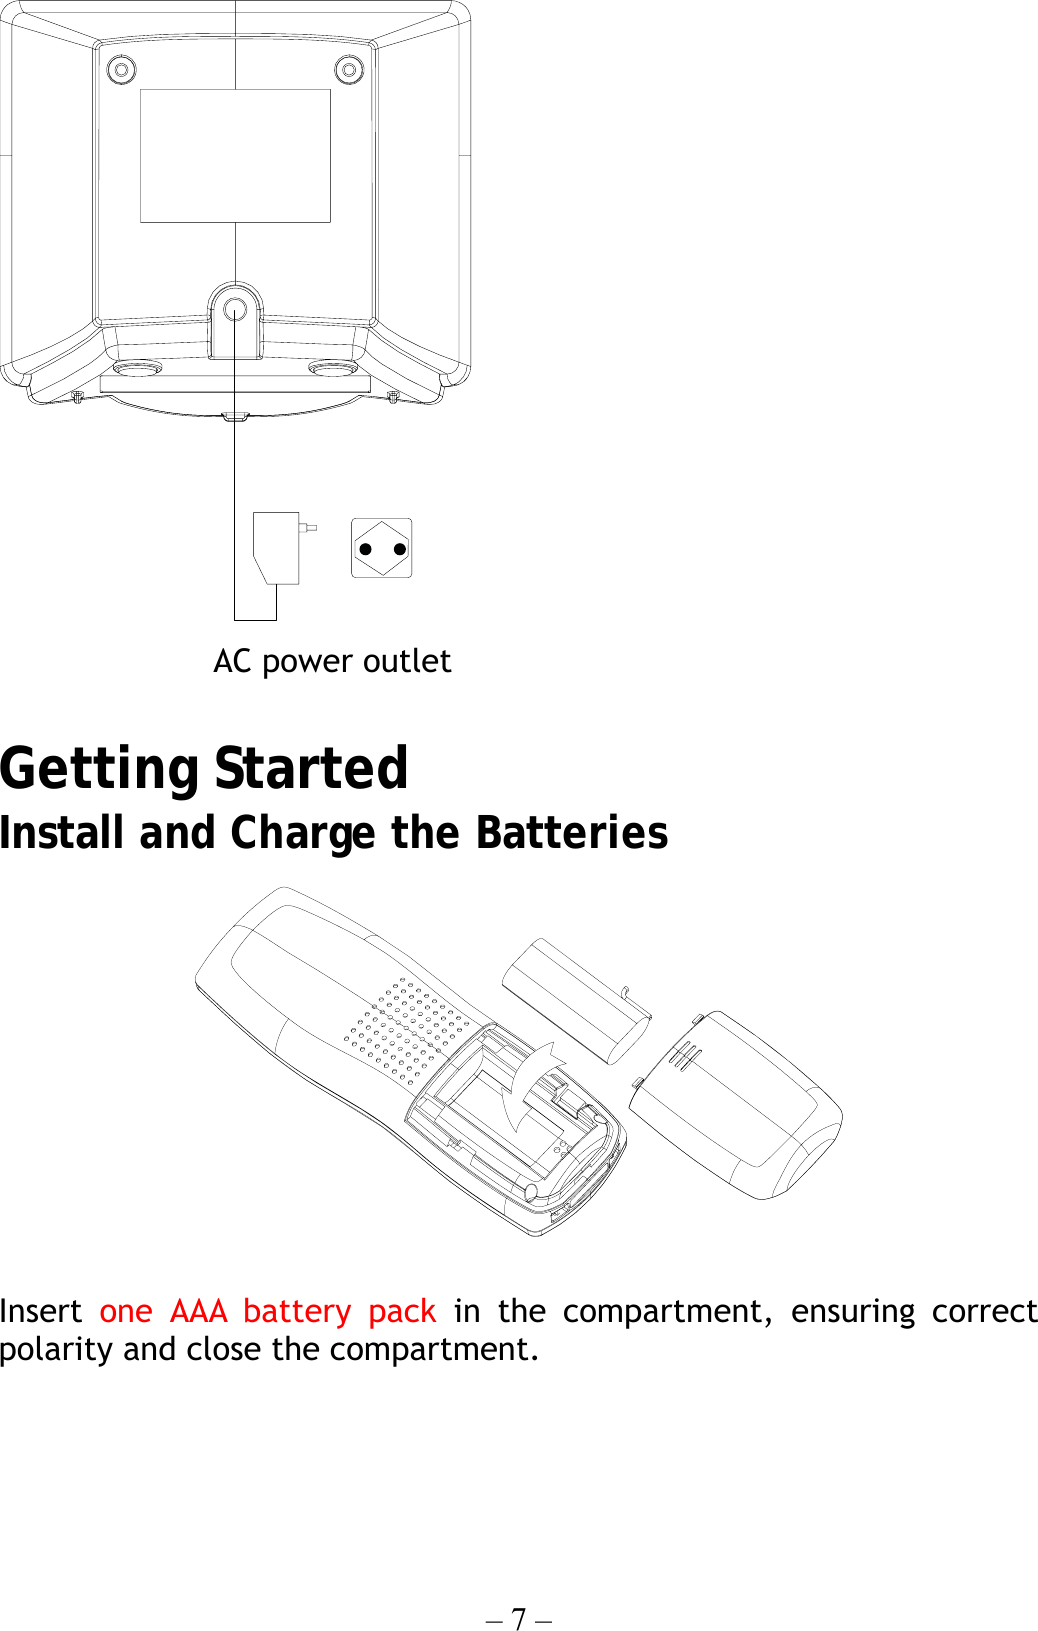 – 7 –  AC power outlet  Getting Started Install and Charge the Batteries    Insert  one AAA battery pack in the compartment, ensuring correct polarity and close the compartment.     